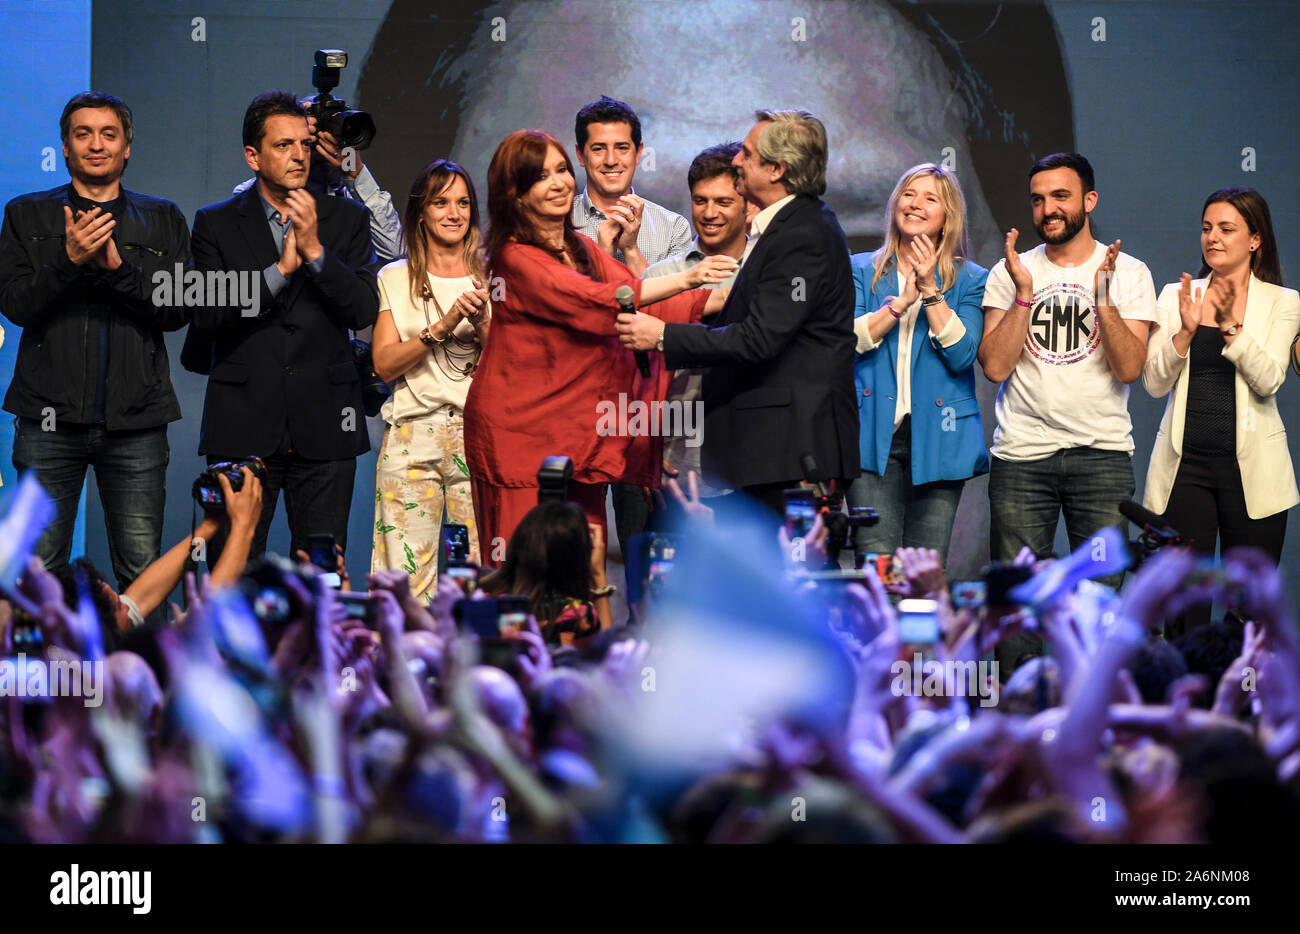 Buenos Aires, Argentina. 27th Oct, 2019. Alberto Fernandez (center r), presidential candidate of the Peronists, and Cristina Fernandez de Kirchner (center l), former president of Argentina, wave to their supporters after the election. Opposition candidate Fernandez has won the presidential election in Argentina. Macri's direct predecessor Cristina Kirchner, who had governed from 2007 to 2015, will be the new Vice President. Credit: Fernando Gens/dpa/Alamy Live News Stock Photo